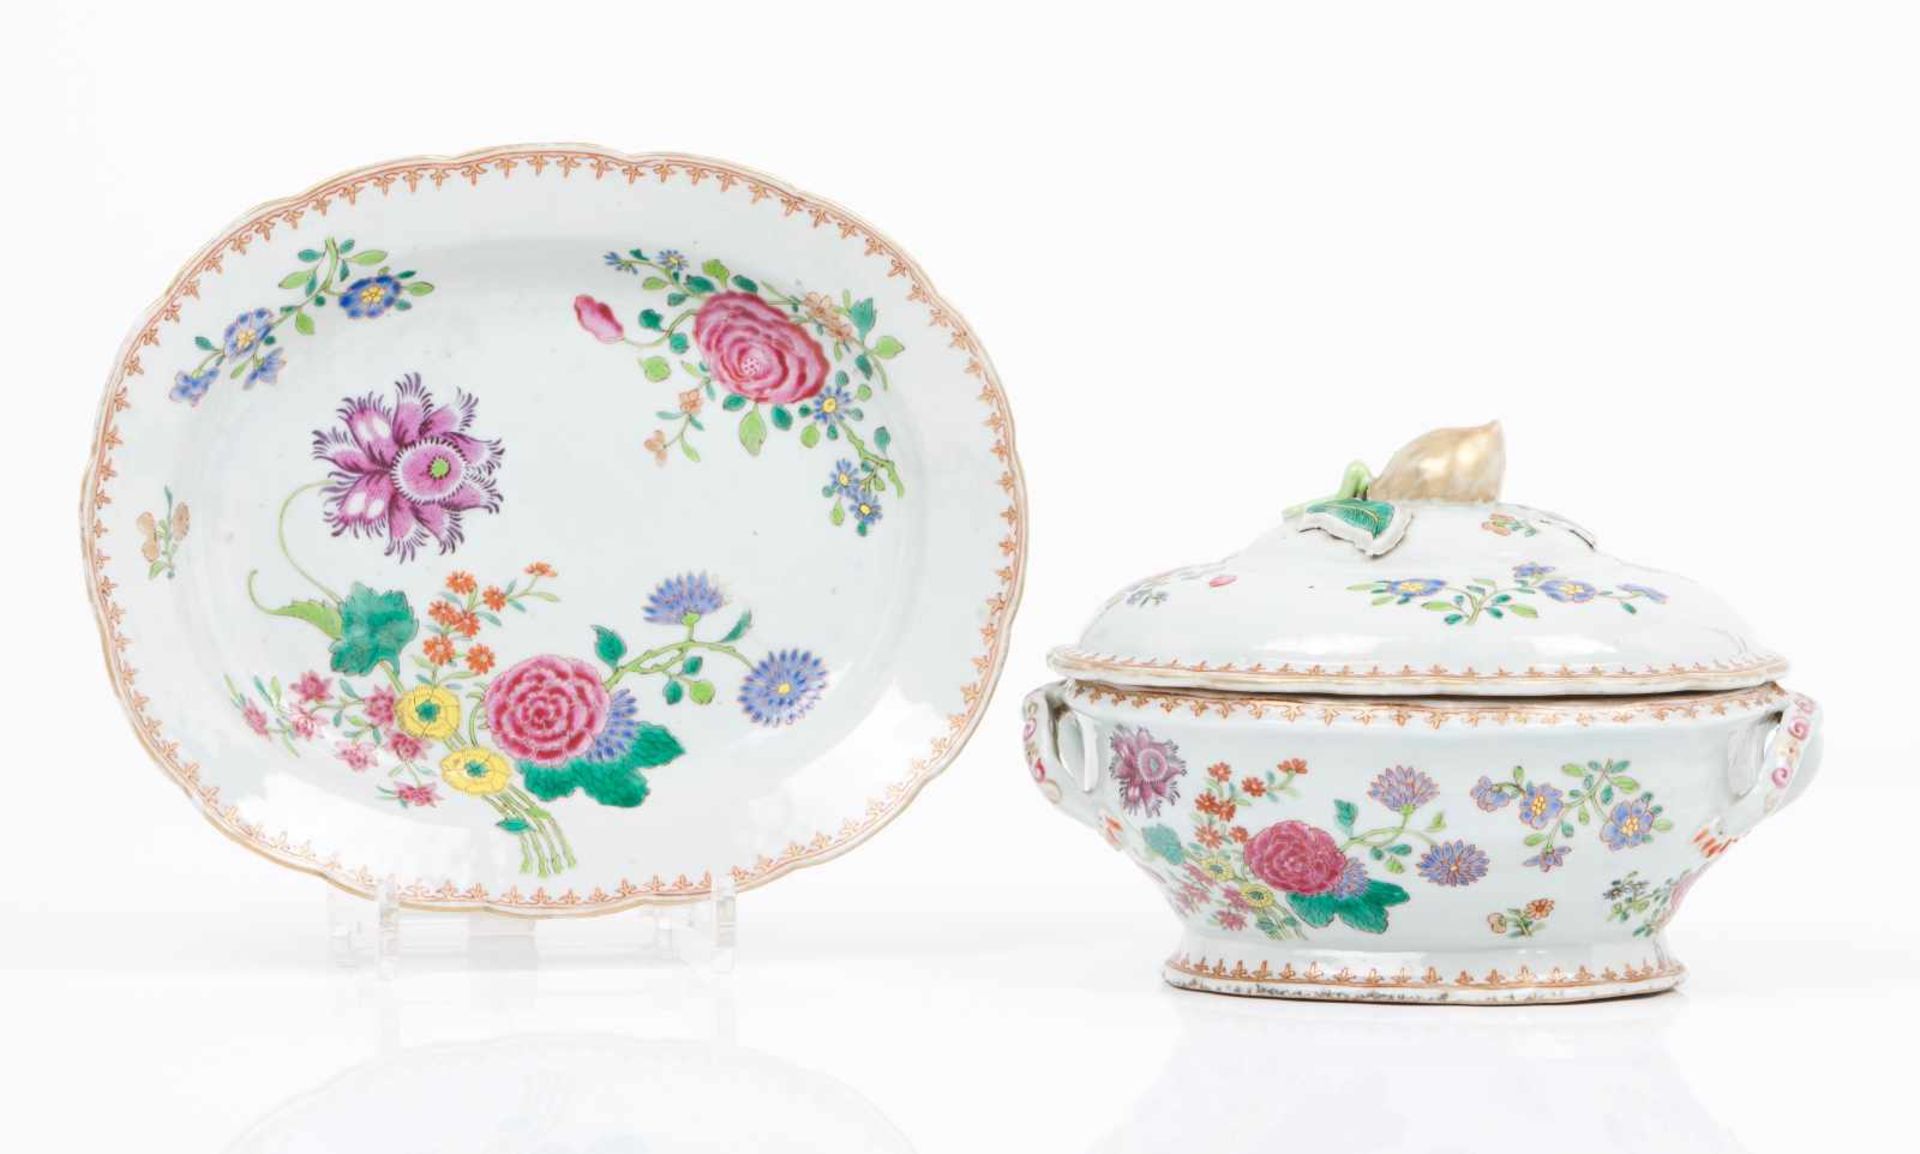 A pair of tureens and plattersChinese export porcelain"Famille Rose" and gilt floral decorationFruit - Bild 2 aus 2